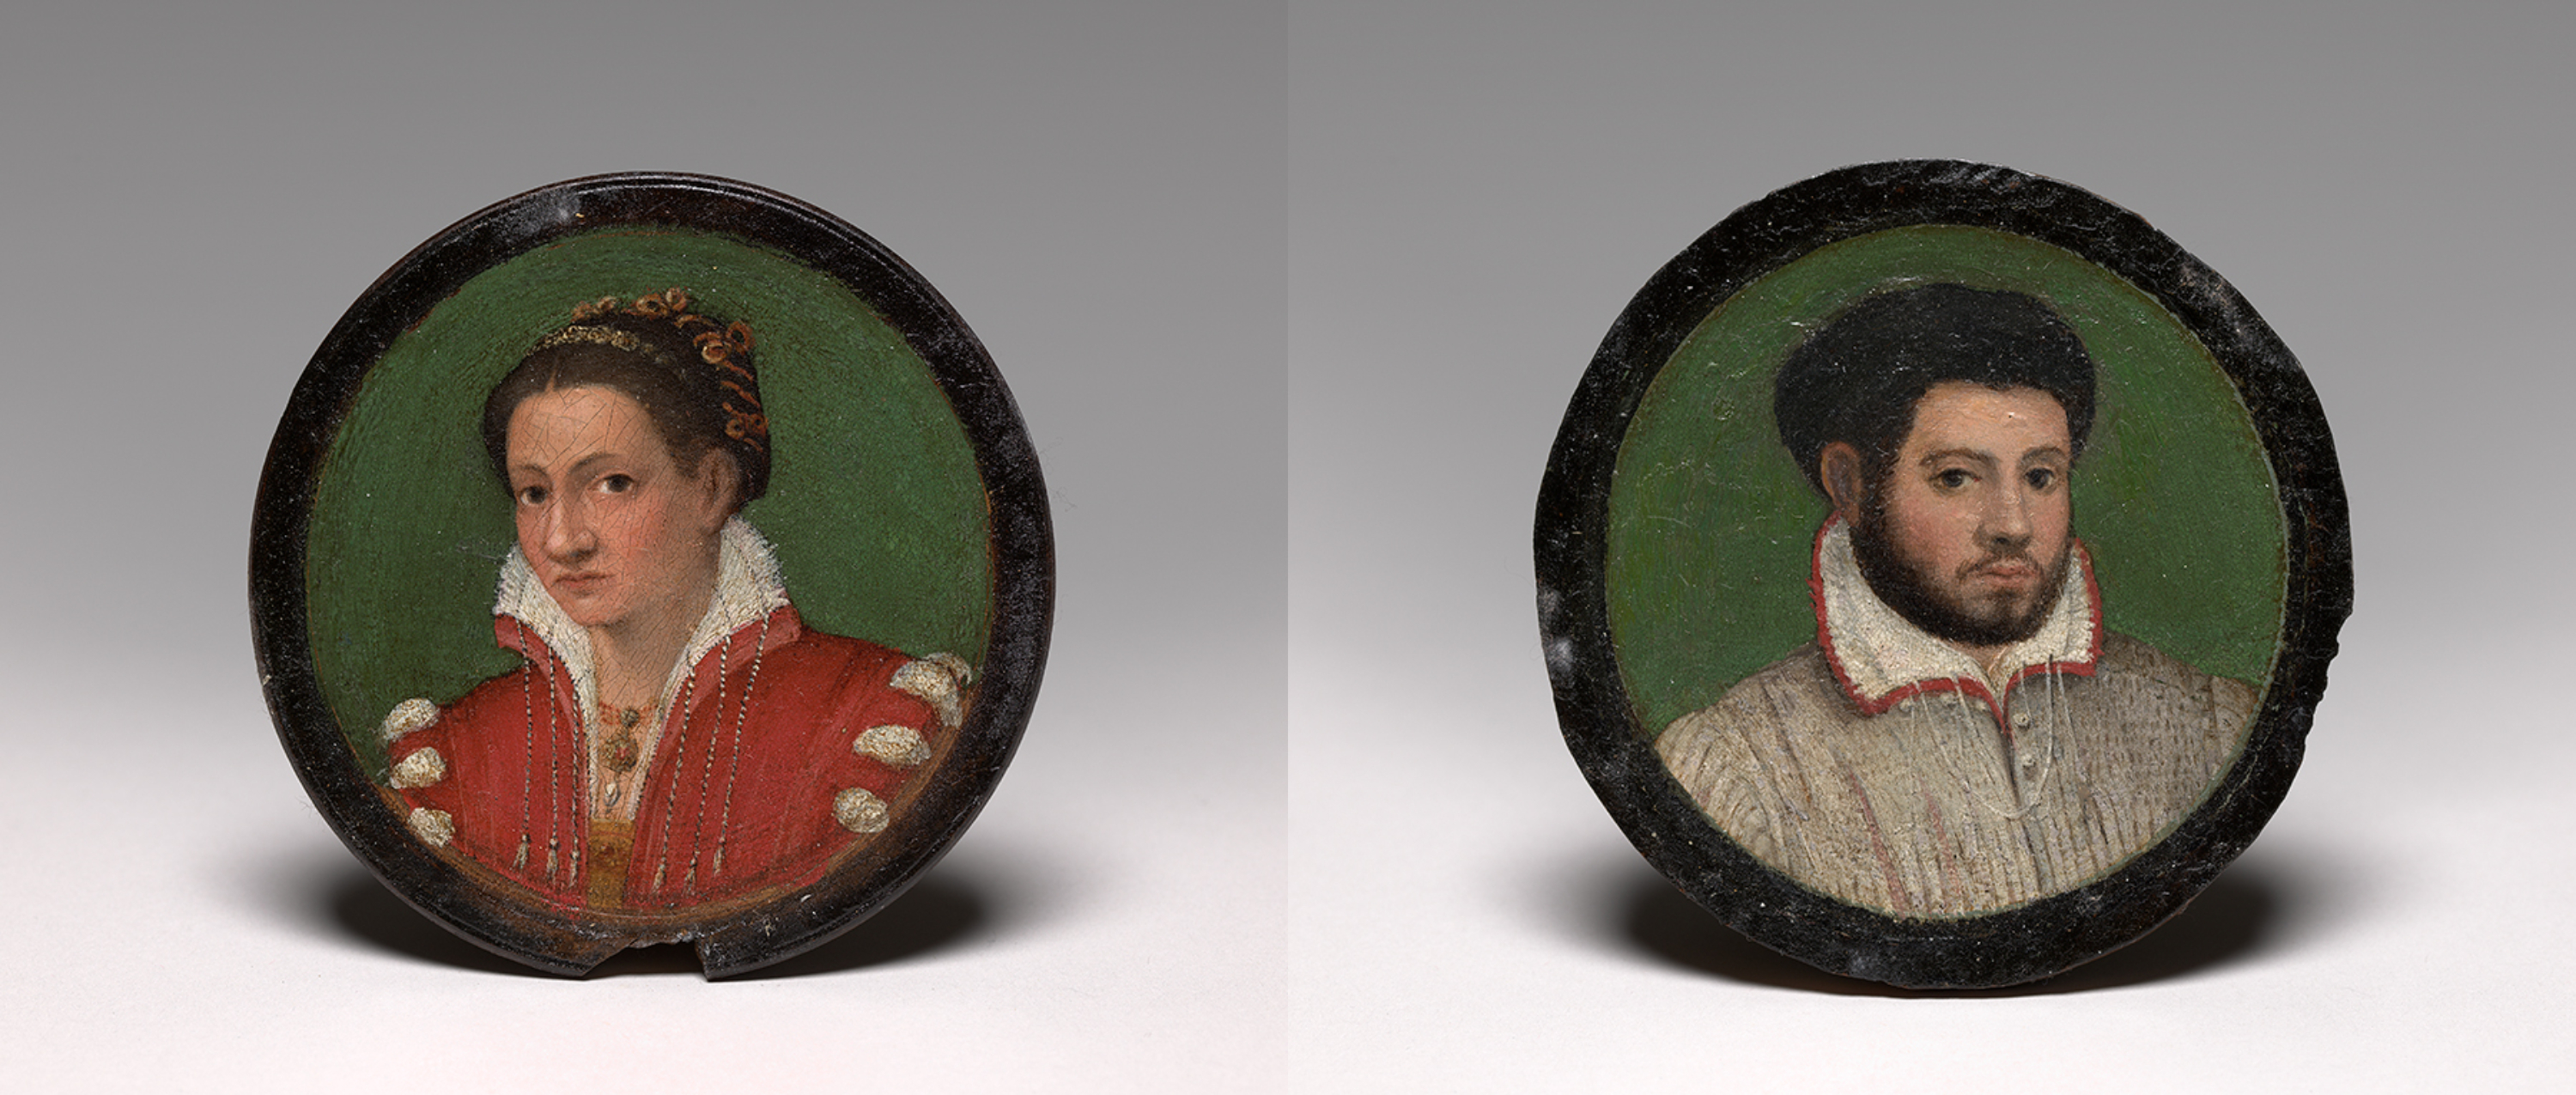 left: circular portrait of a woman in a red dress; right: circular portrait of a man in a white shirt